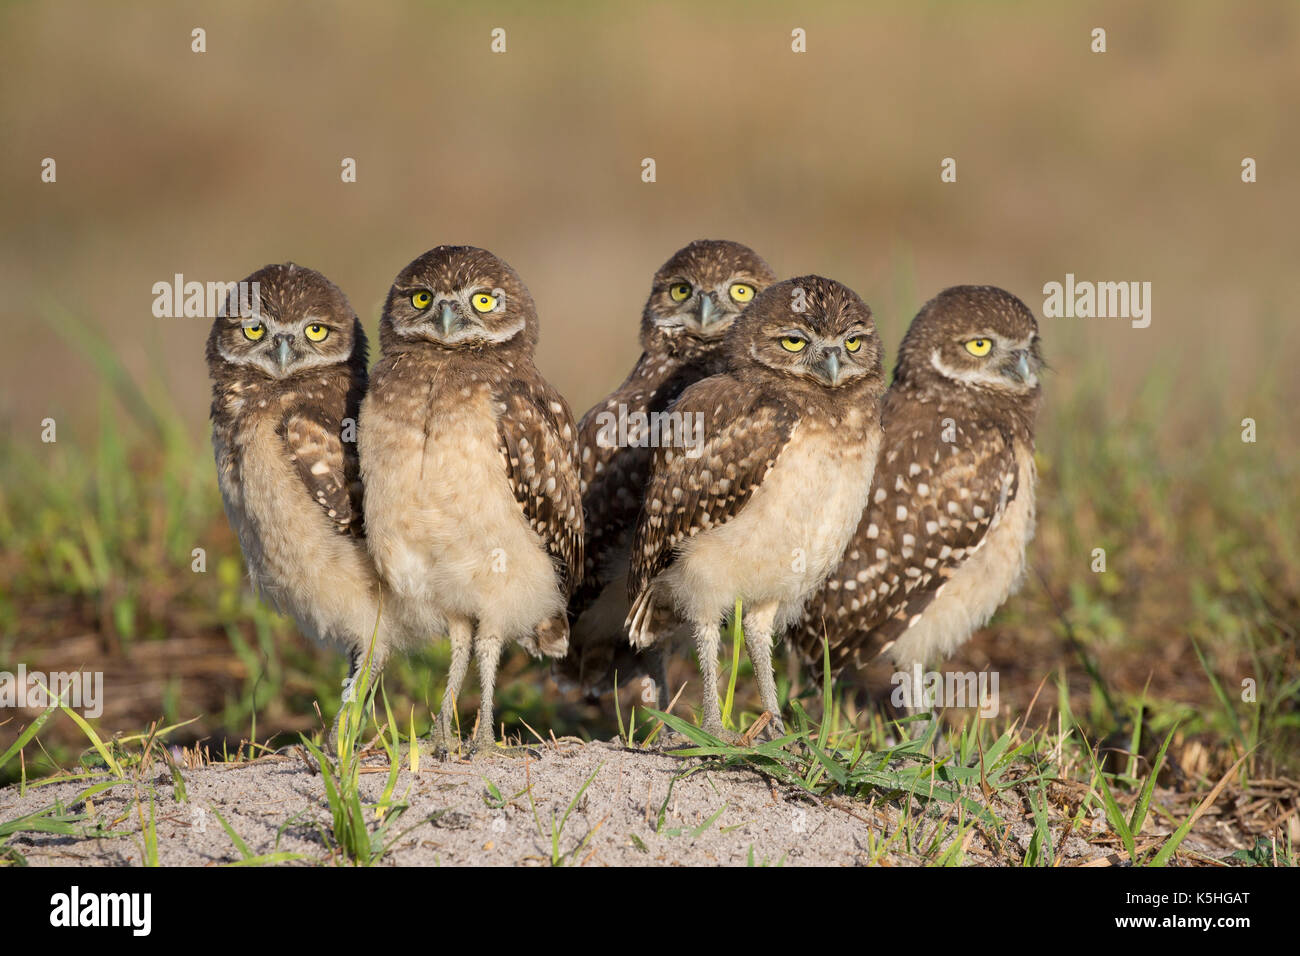 Juvenile Burrowing Owls (Athene cunicularia) standing by burrow in Florida Stock Photo